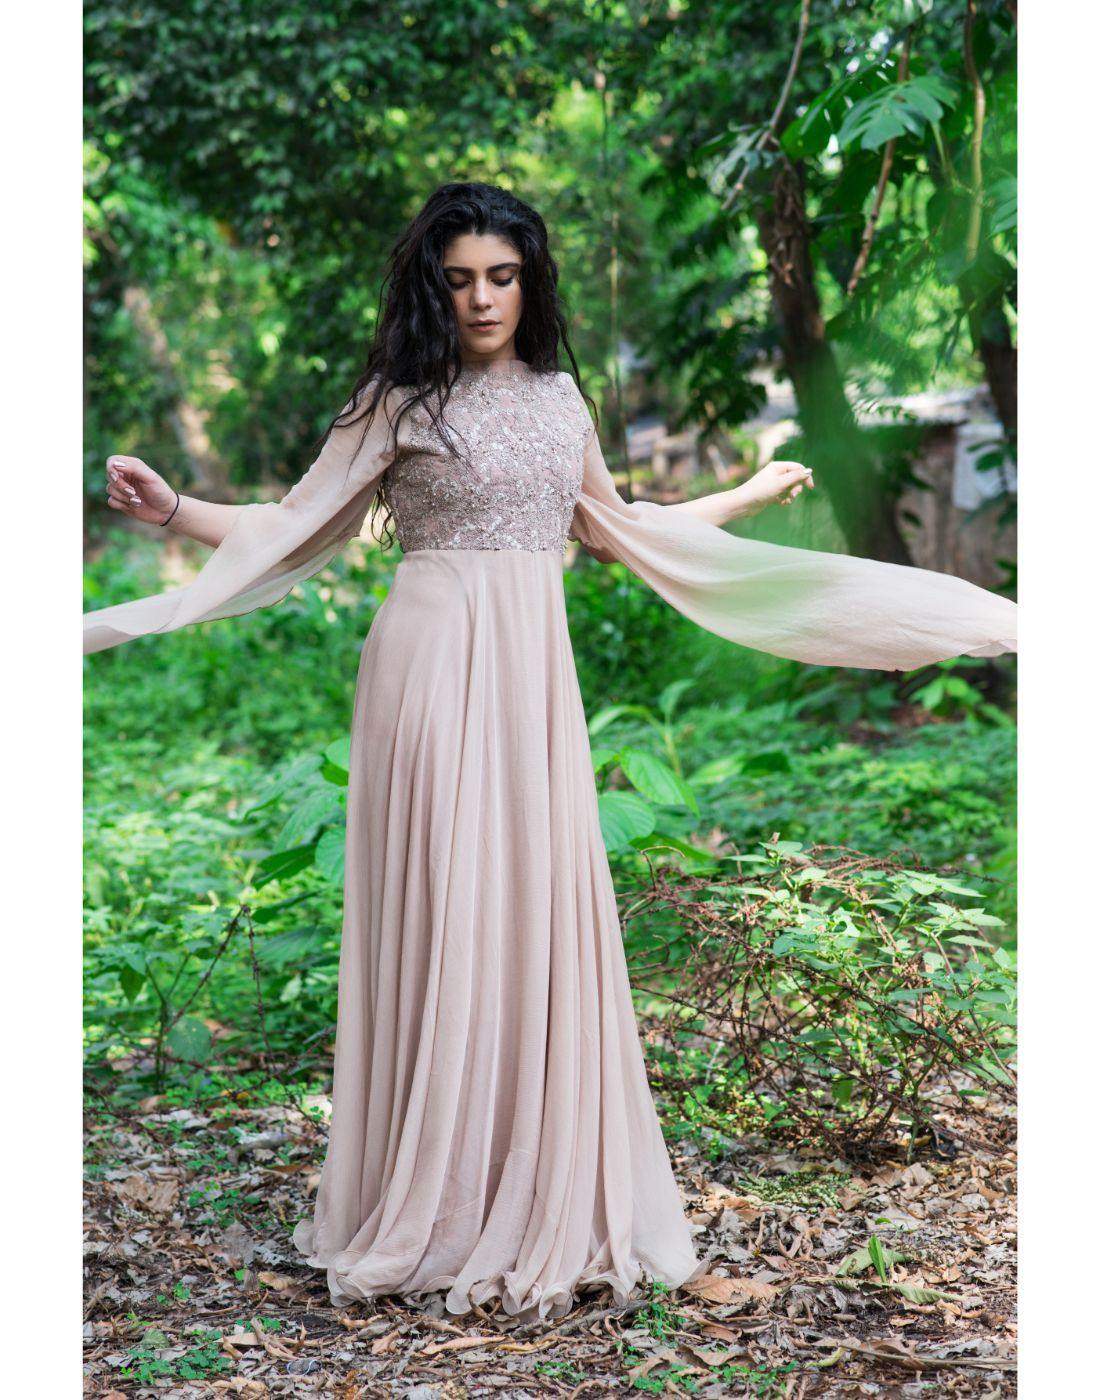 A line tulle long ball gown dress formal dress · Dreamy Dress · Online  Store Powered by Storenvy